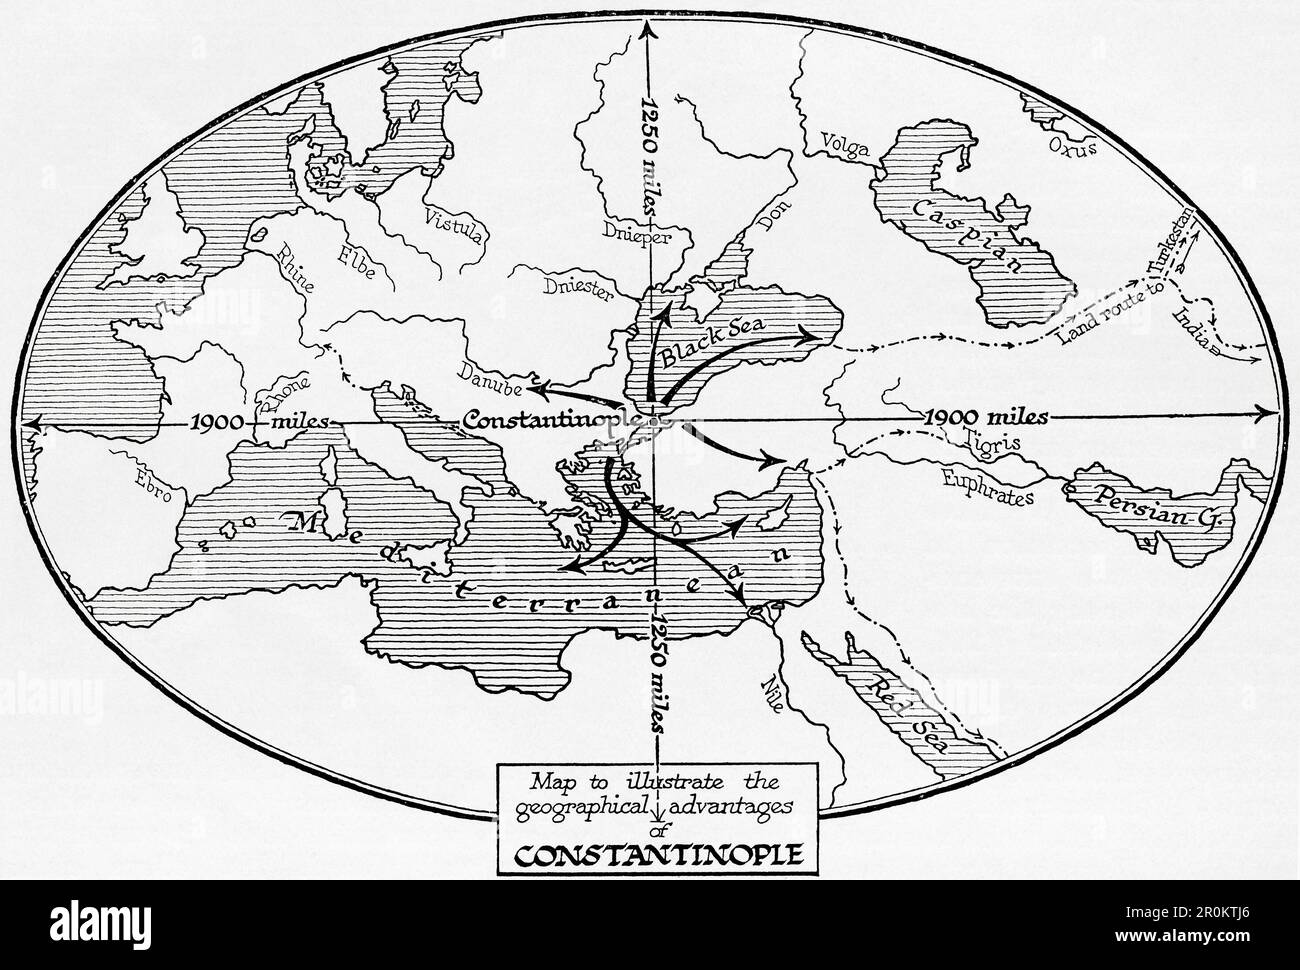 Map to illustrate the geographical advantages of Constantinople.  From the book Outline of History by H.G. Wells, published 1920. Stock Photo